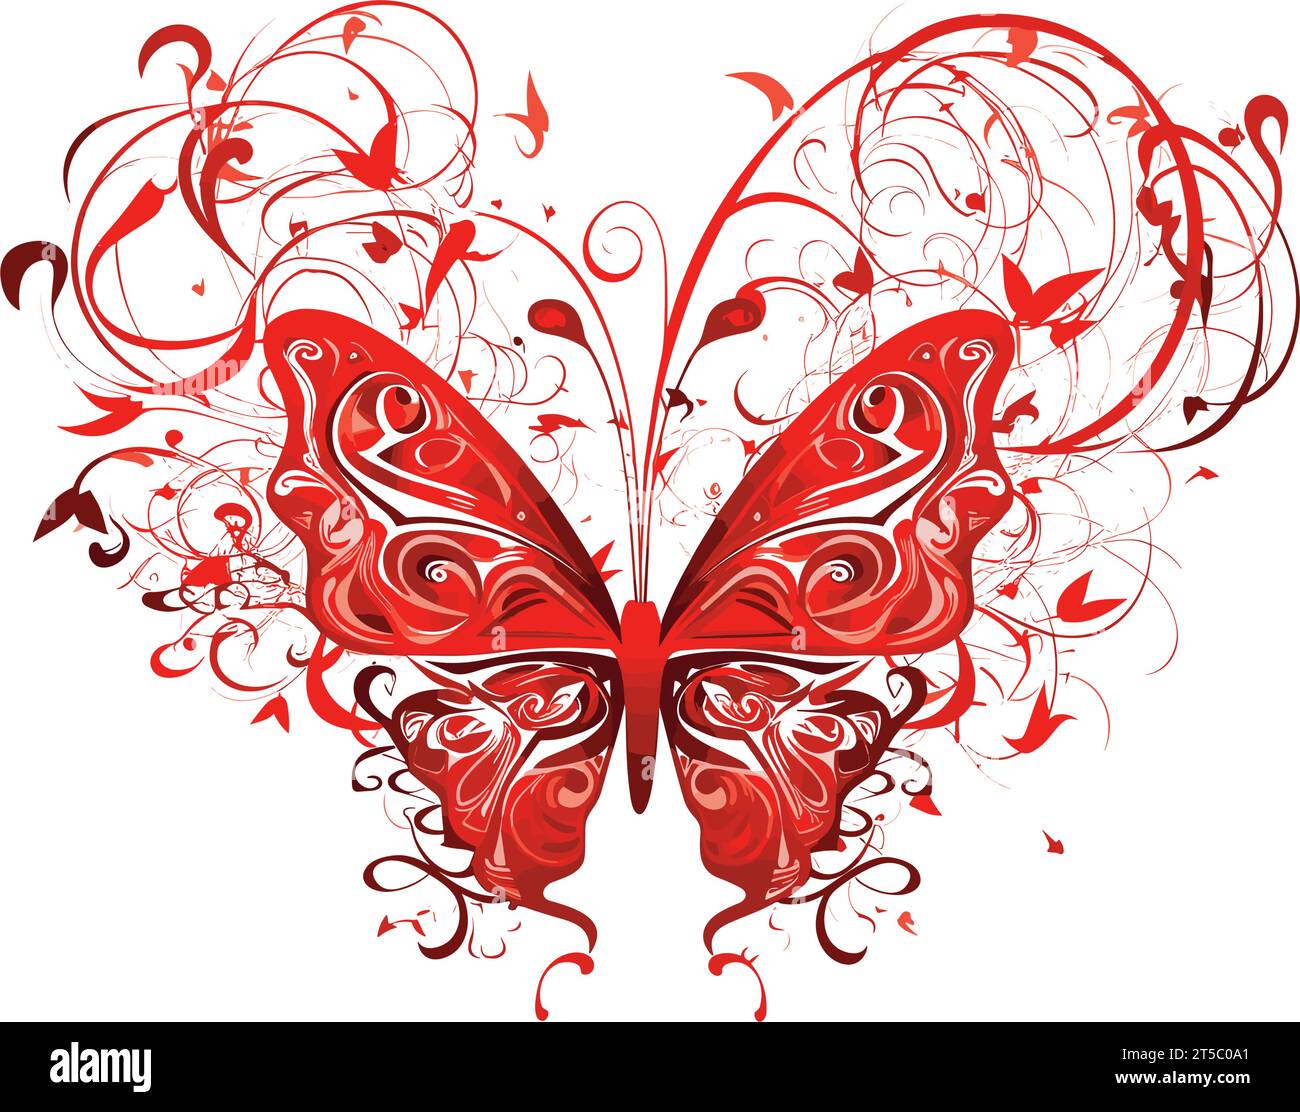 Drawing of Butterfly heart valentine illustration. Element for design illustration separated, sweeping overdrawn lines. Stock Vector